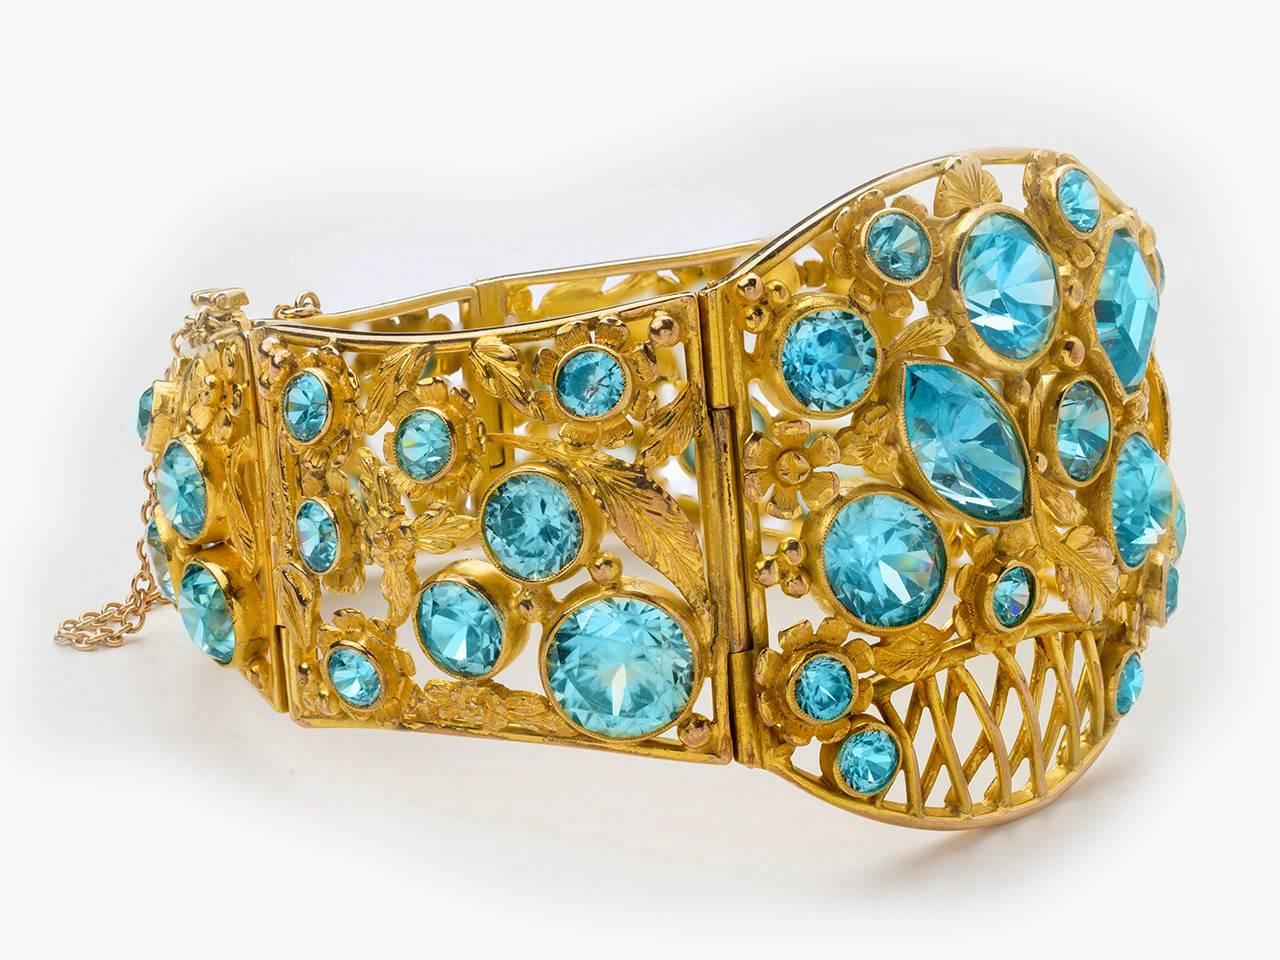 10k gold gold bracelet set with fancy and circular- cut  blue zircons ,designed as a flower basket with hinged panels.